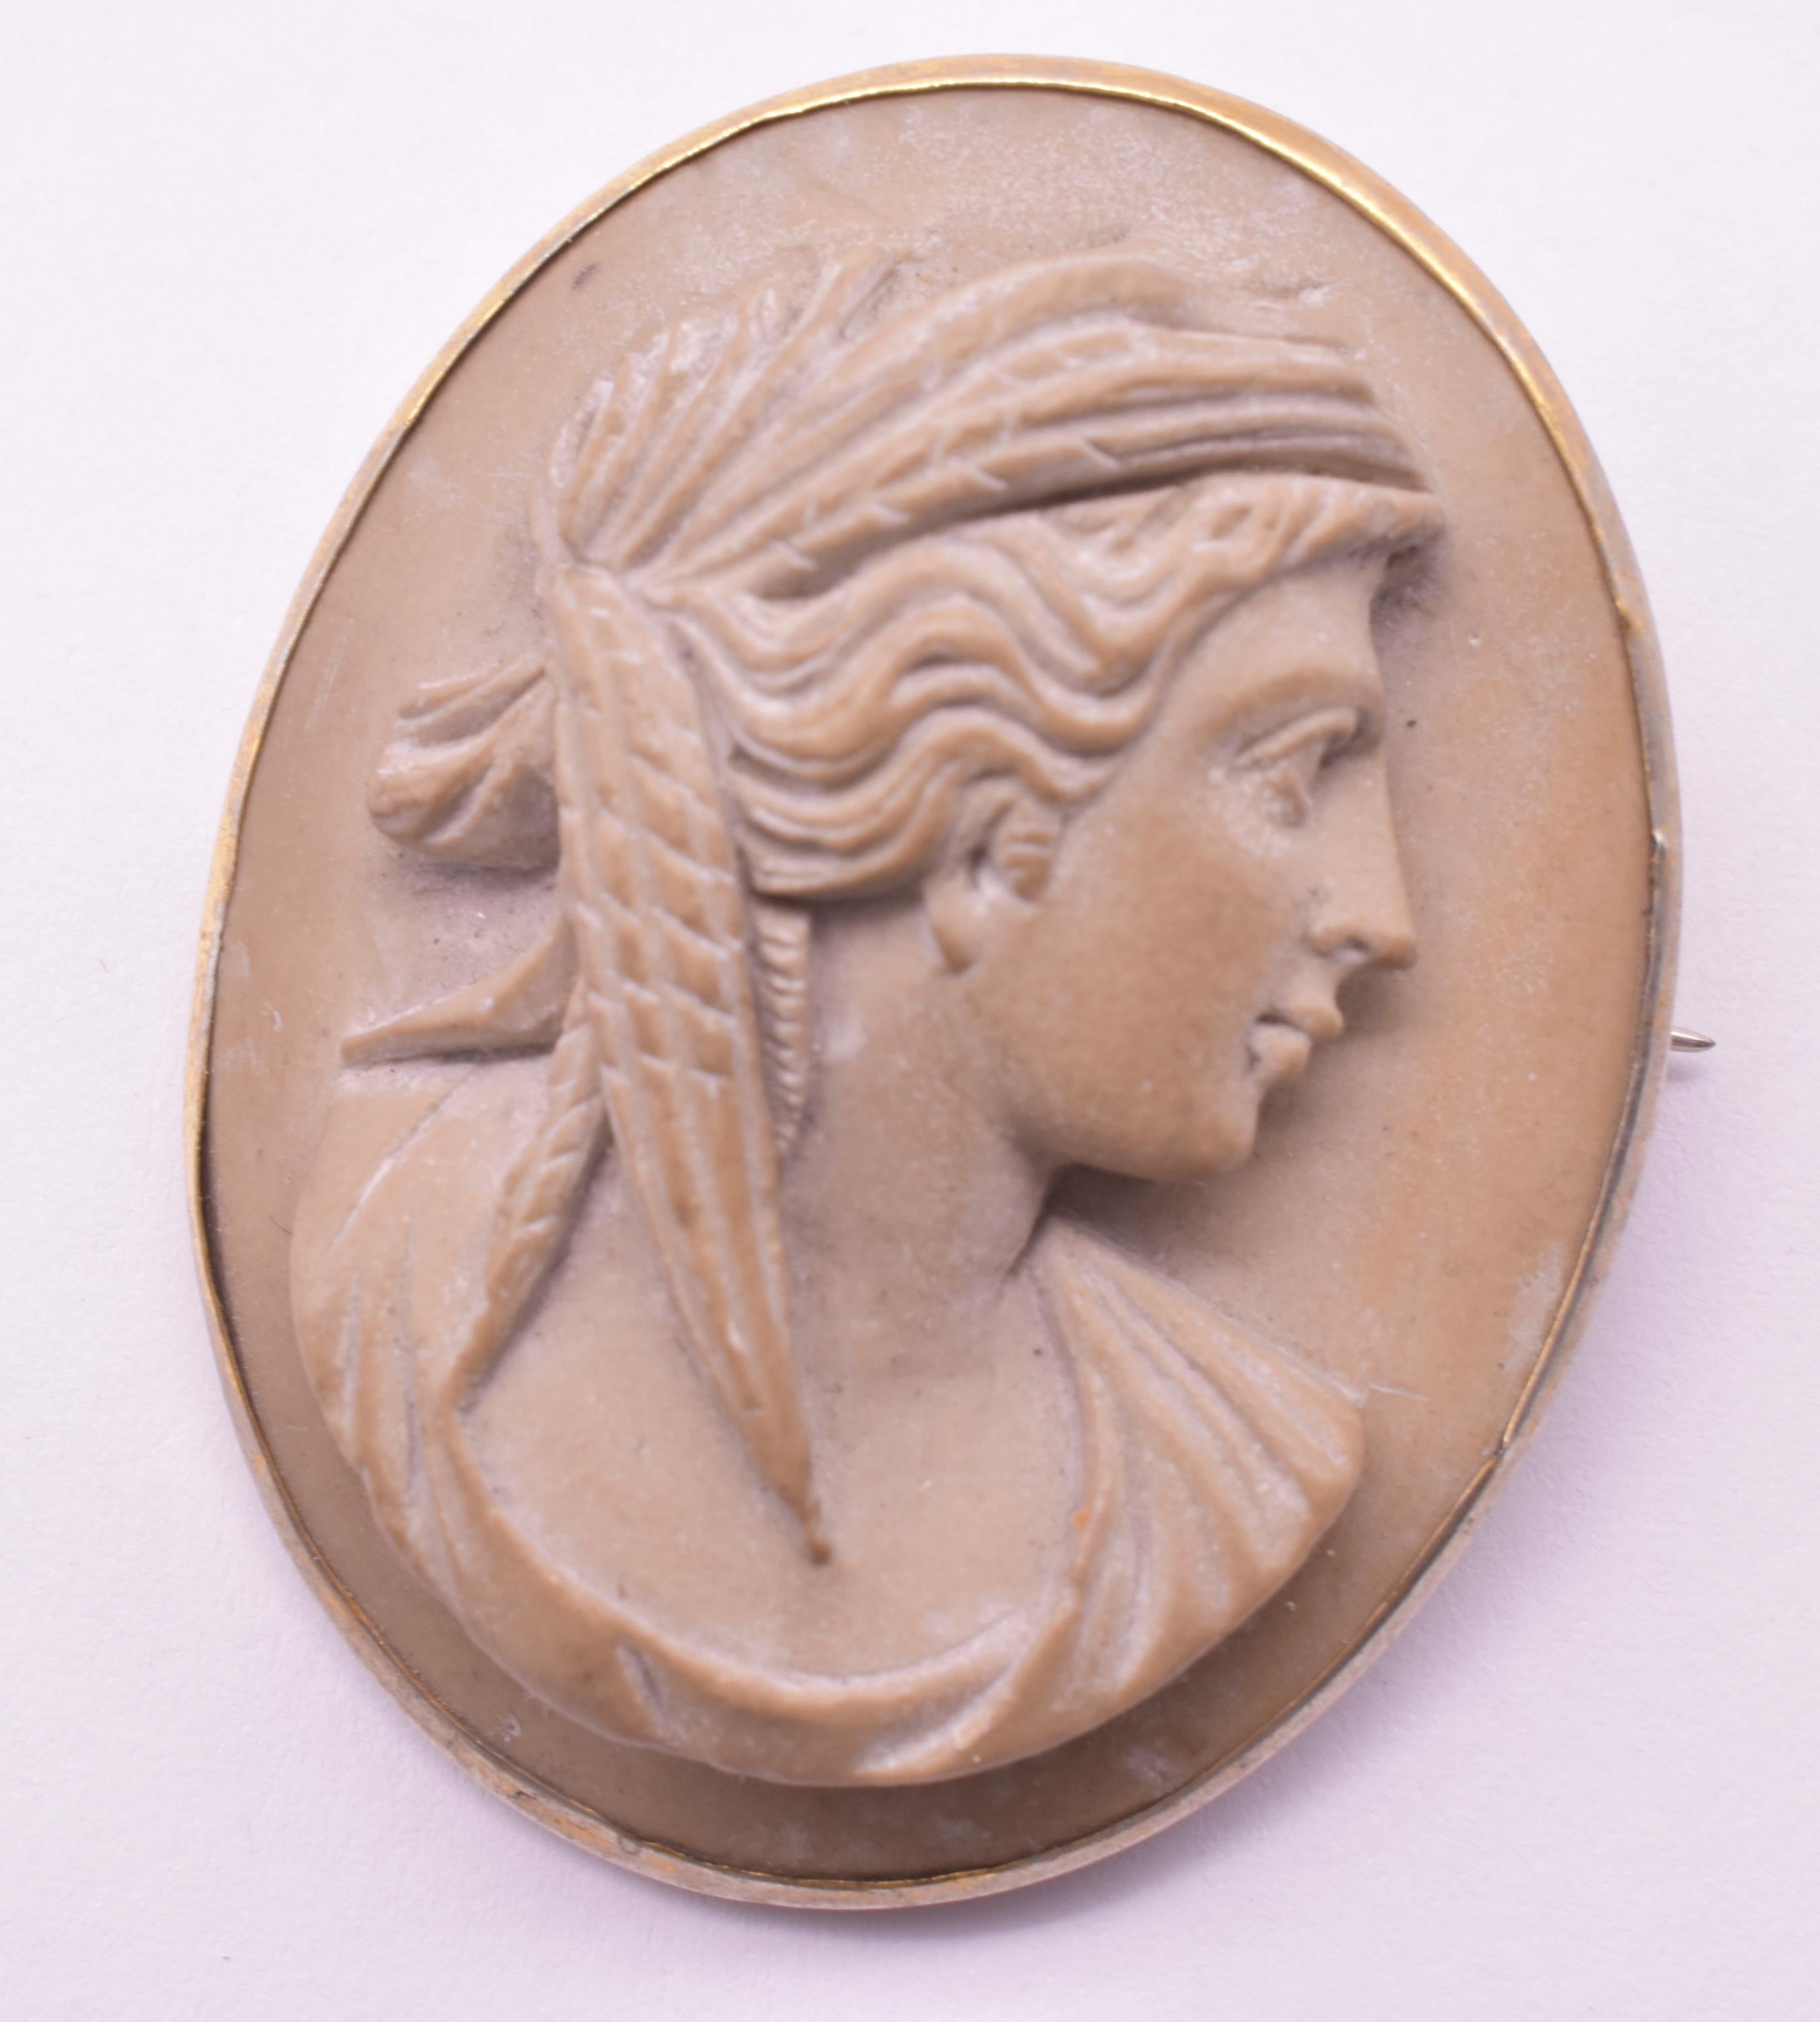 C1850 Lava Putty Cameo Brooch of Demeter, Goddess of Agriculture In Good Condition For Sale In Baltimore, MD